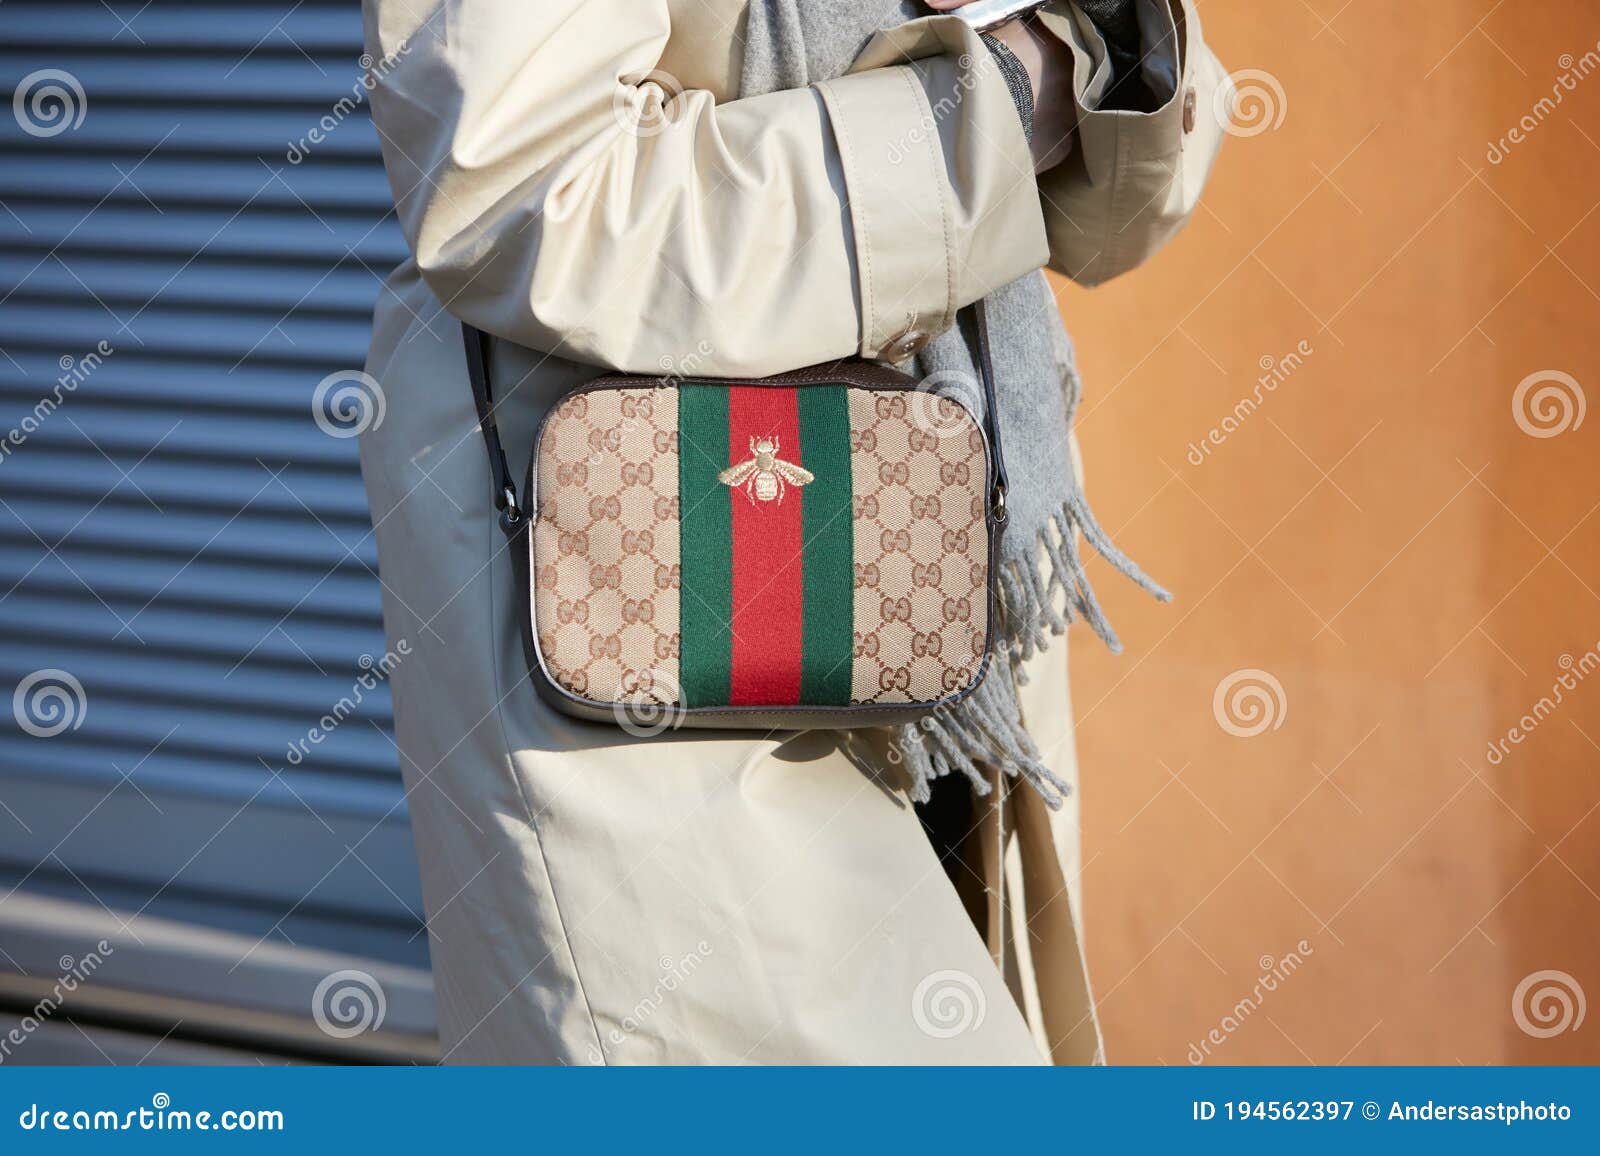 MILAN - JANUARY 13: Man with Louis Vuitton bag and white Gucci